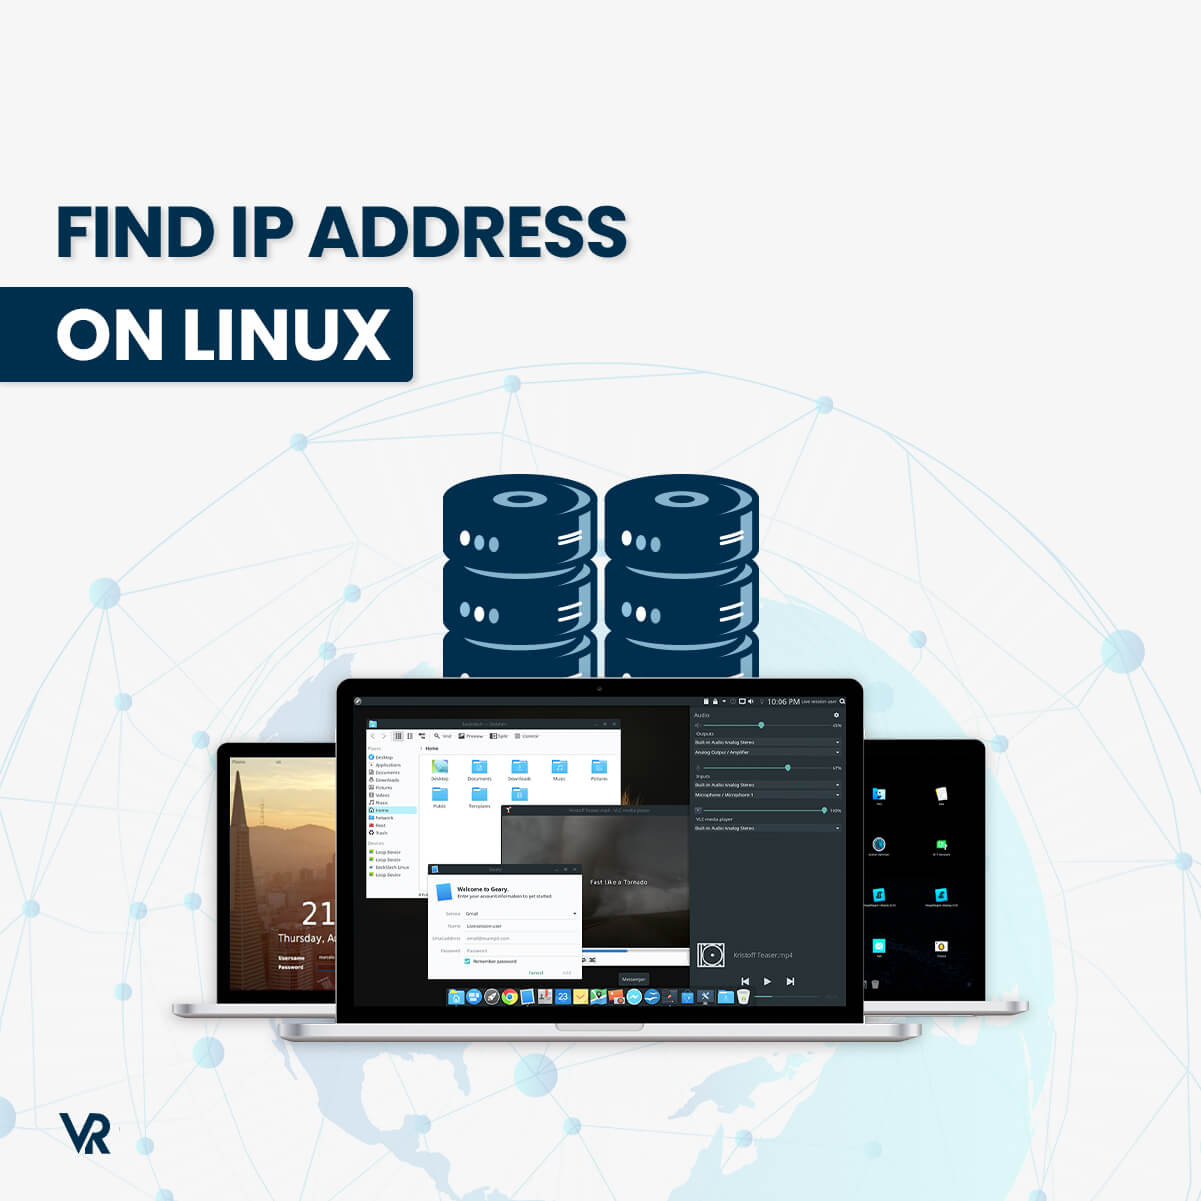 Change-Ip-Address-on-Linux-Featured